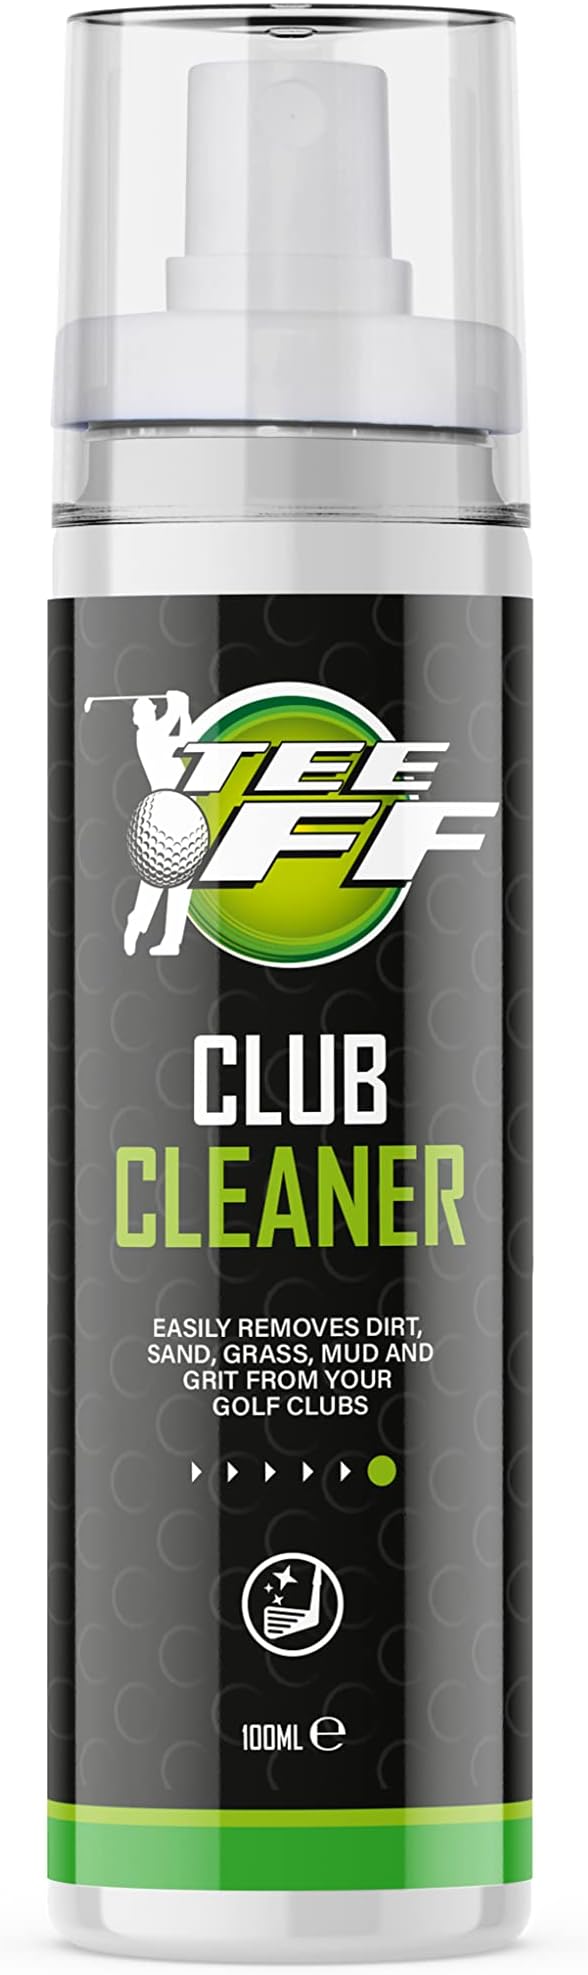 Tee Off Golf Club Cleaner | Use on Irons, Woods, Putters, Grips, Balls, Shoes and Bags-4519